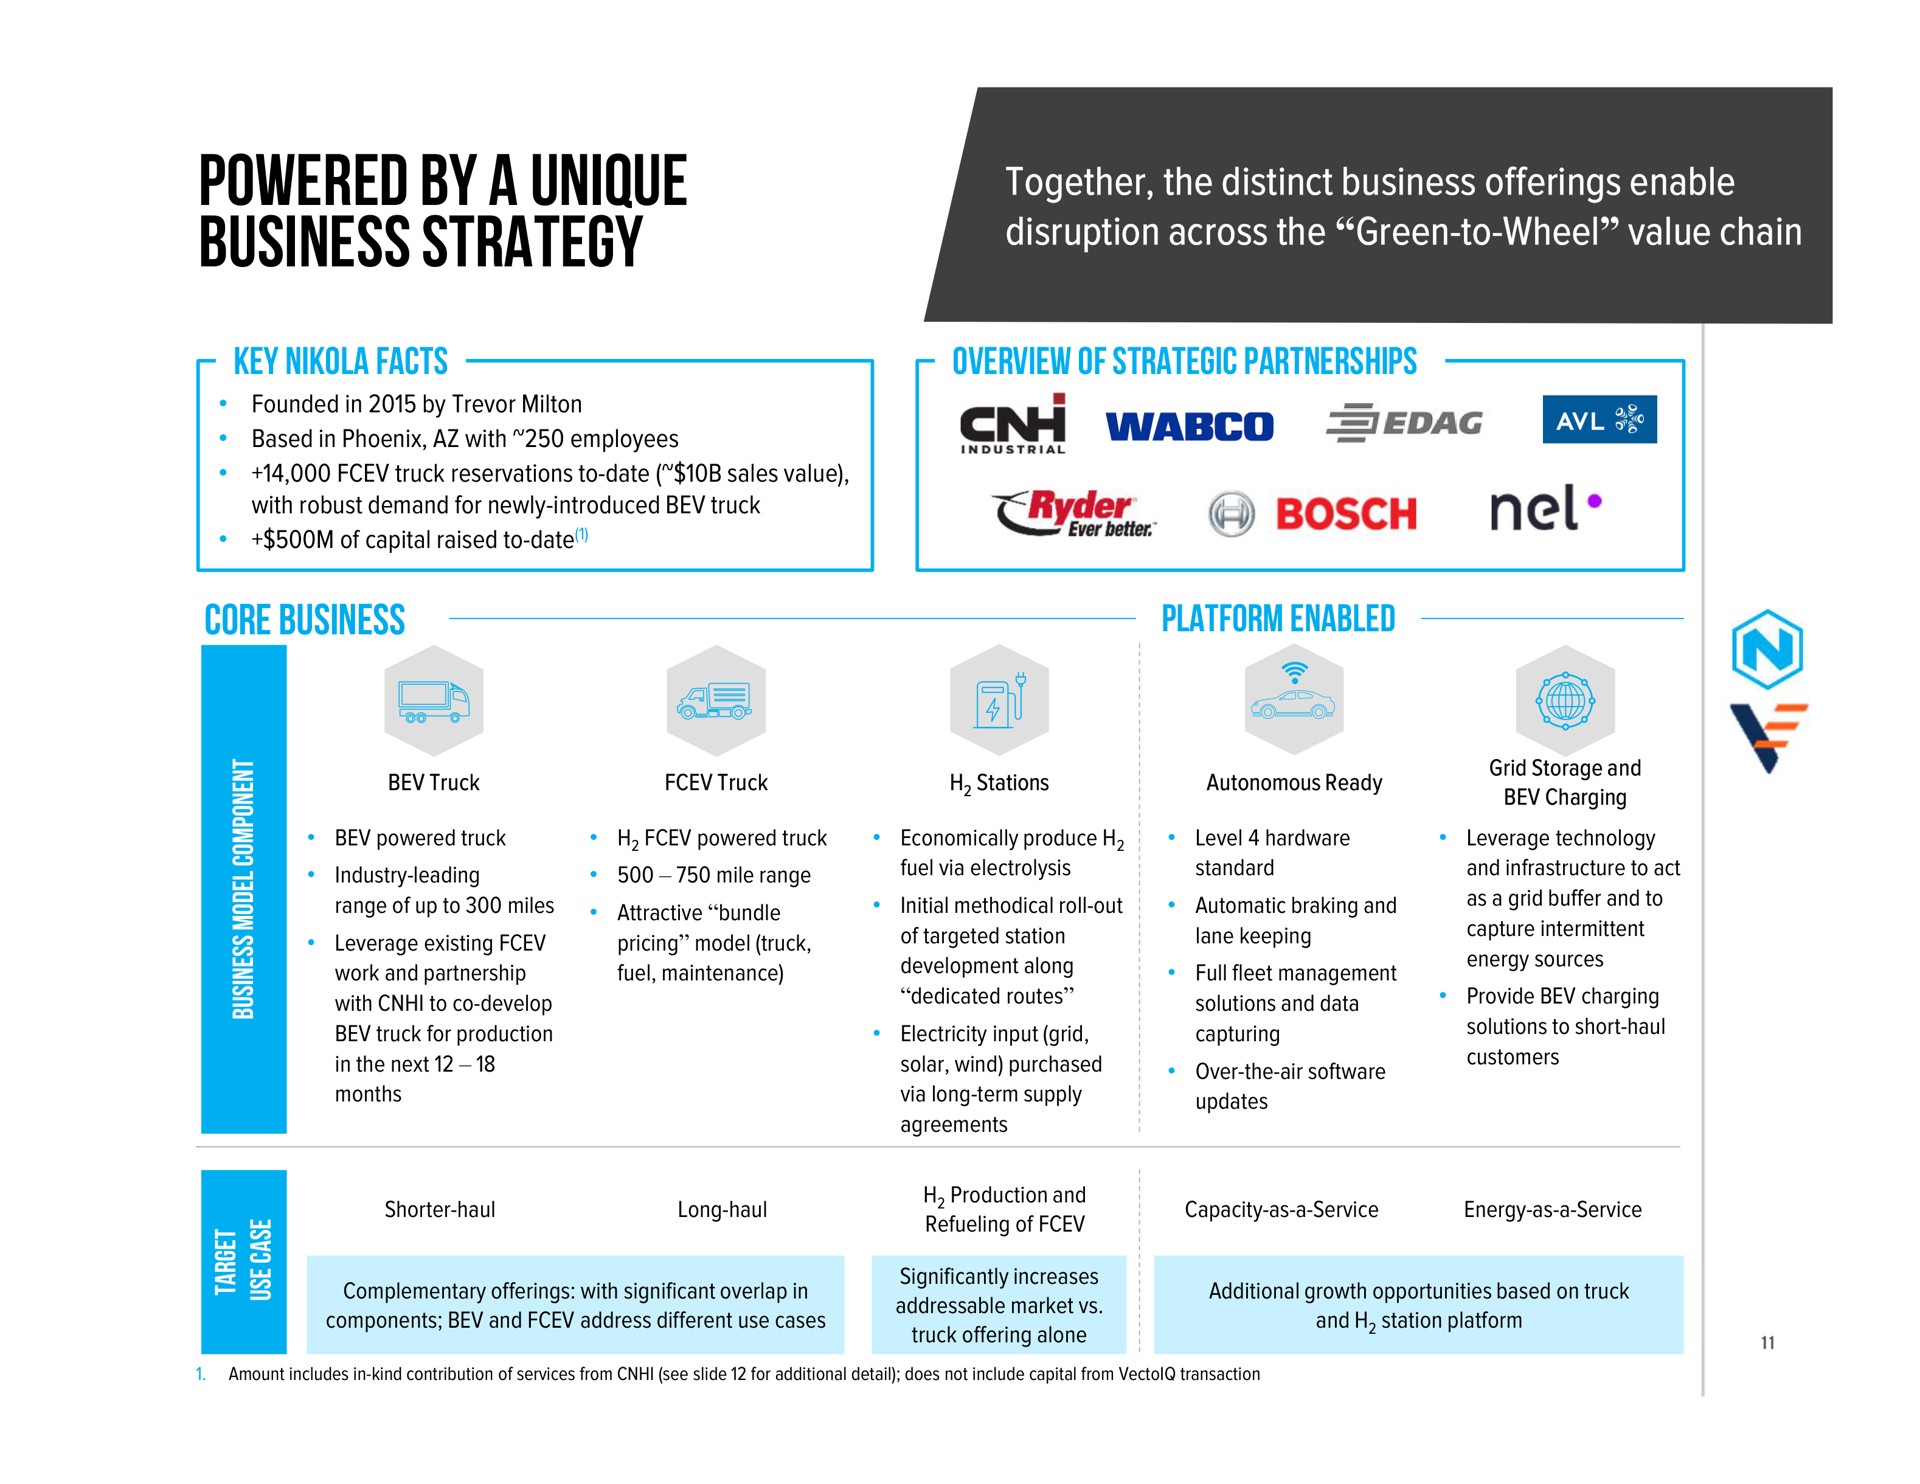 powered by a unique business strategy core business overview of strategic partnerships i bosch | Nikola